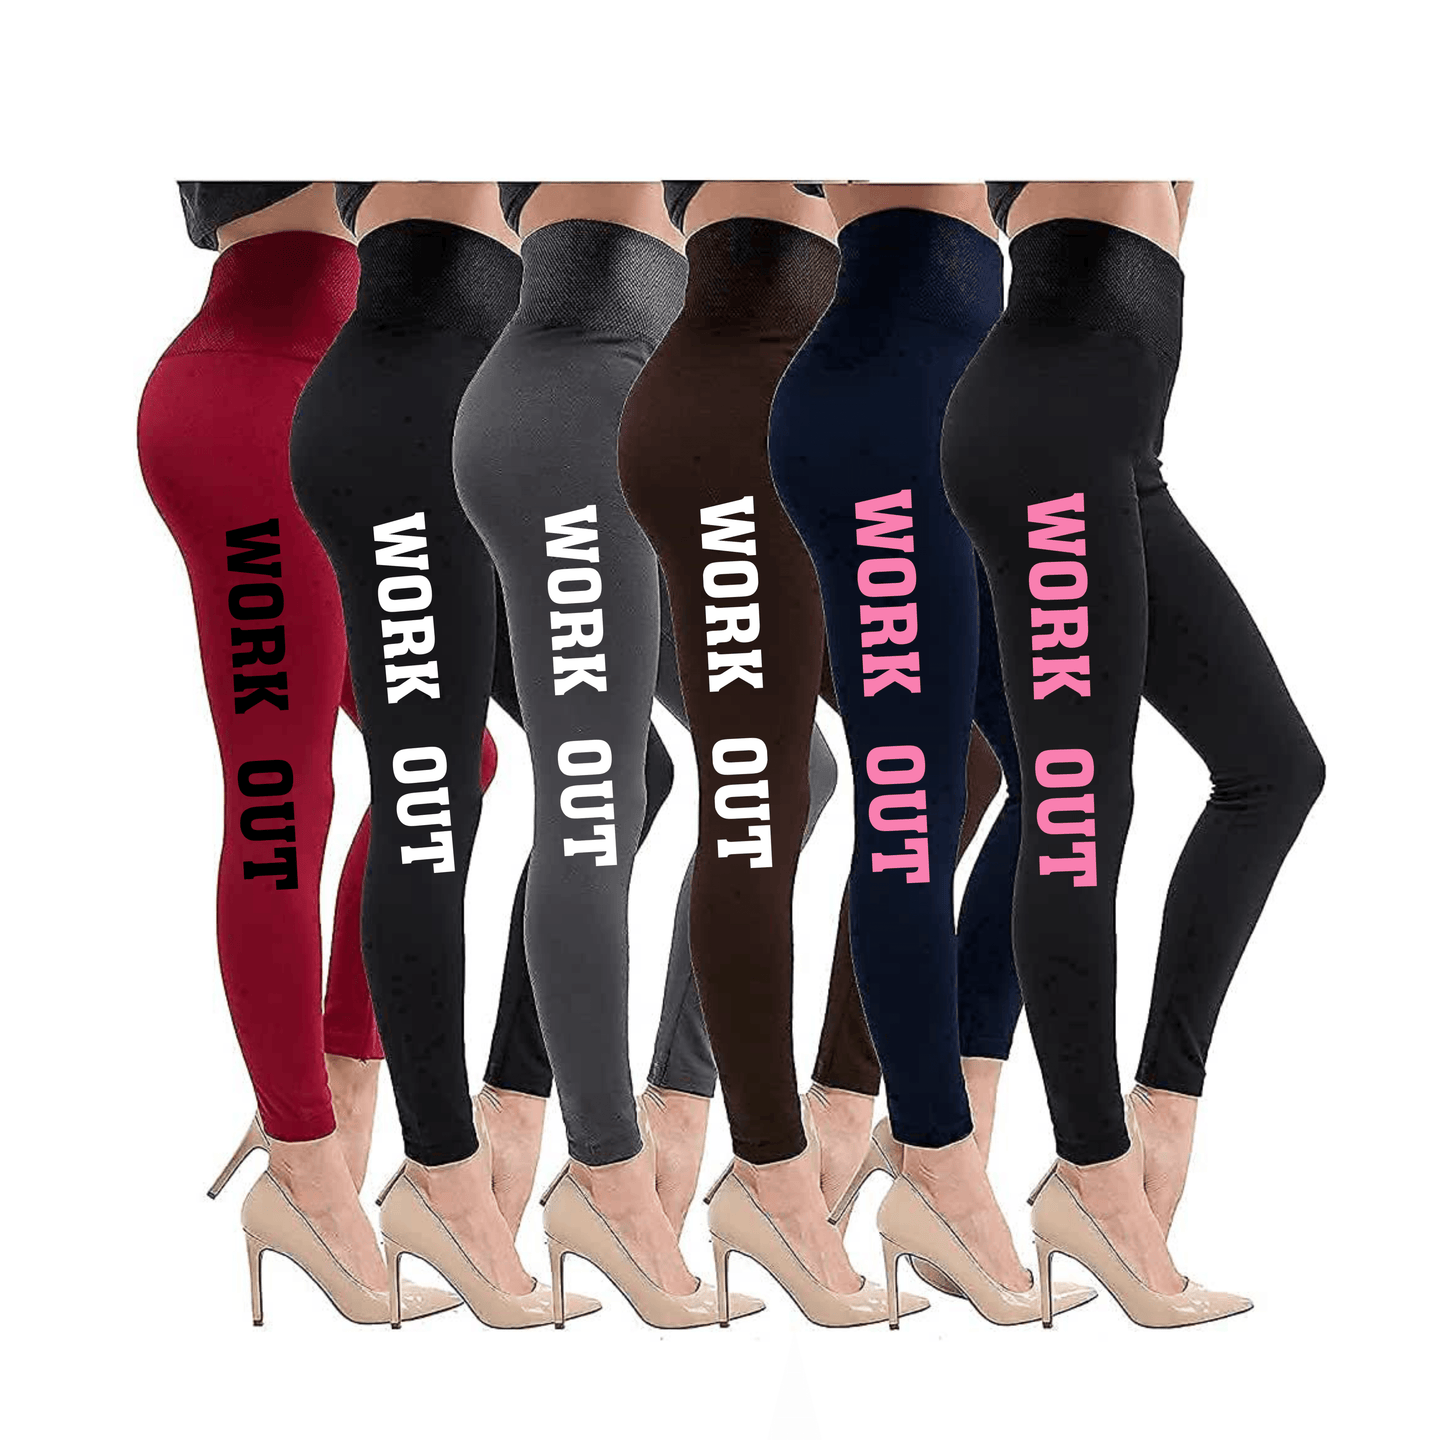 12 Pack of "Work out "Super Soft Thick Fleece Lined Leggings Cozy Warm Stretchy - PremiumBrandGoods